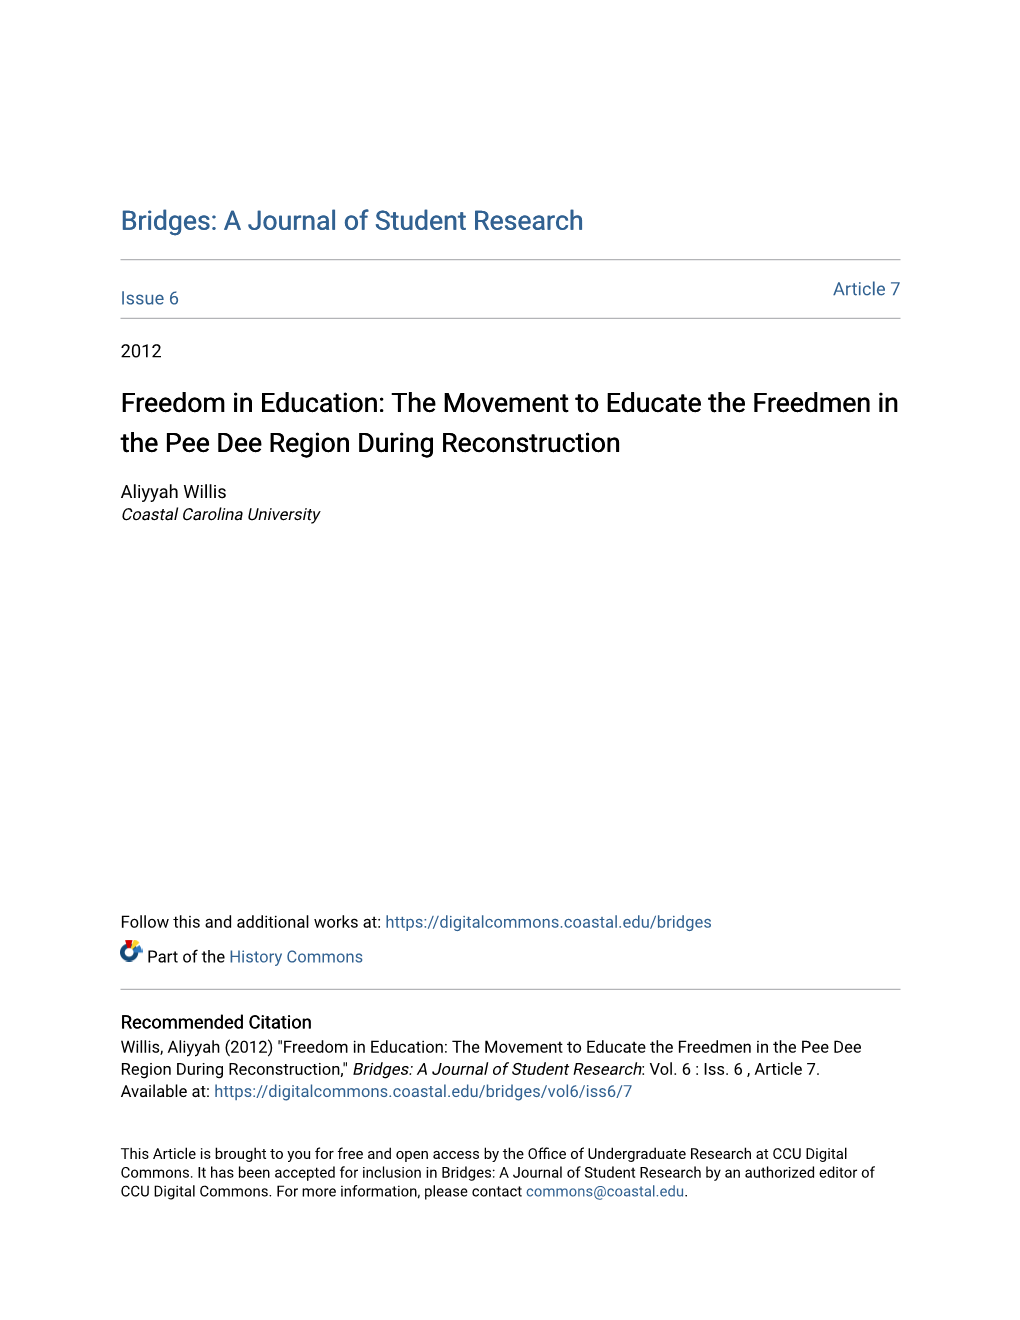 Freedom in Education: the Movement to Educate the Freedmen in the Pee Dee Region During Reconstruction